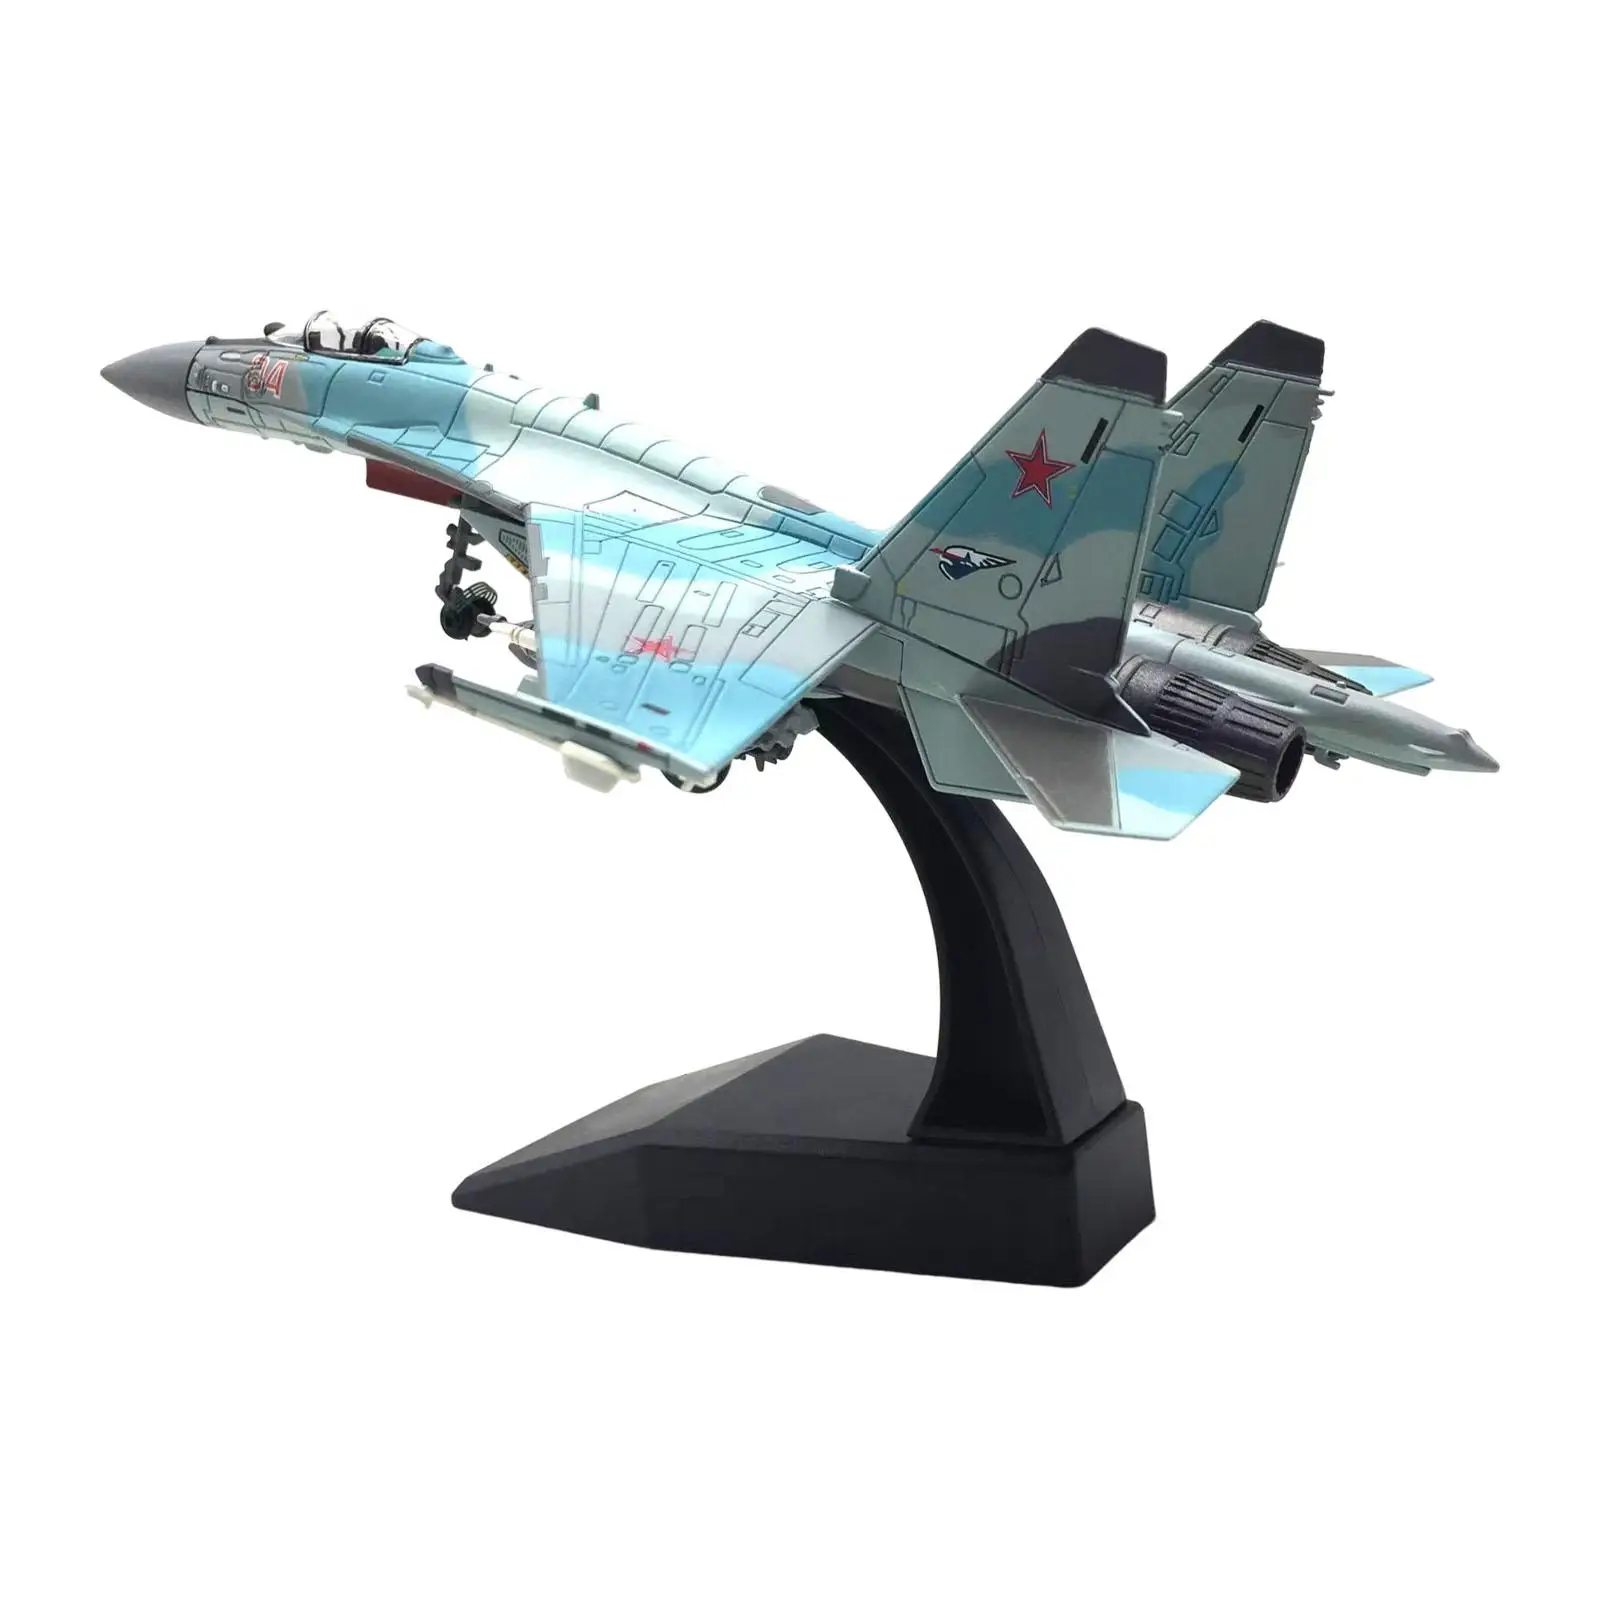 1/100 Fighter Model Airplane Alloy Diecast Aircraft for Desktop Decor